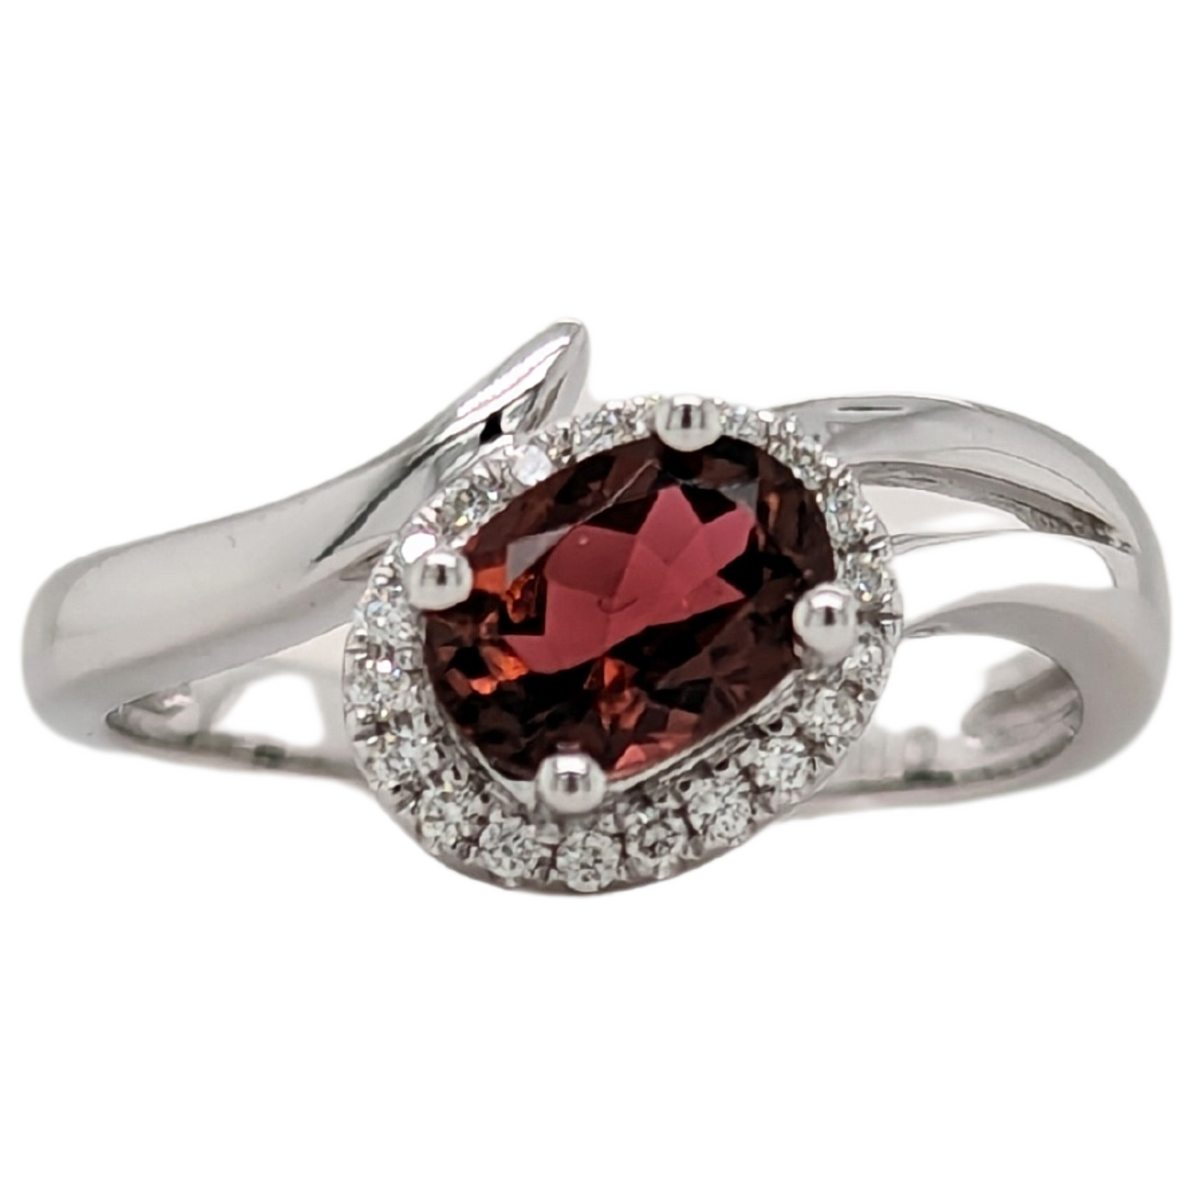 14K White Gold Oval Pink Tourmaline Ring with Diamonds